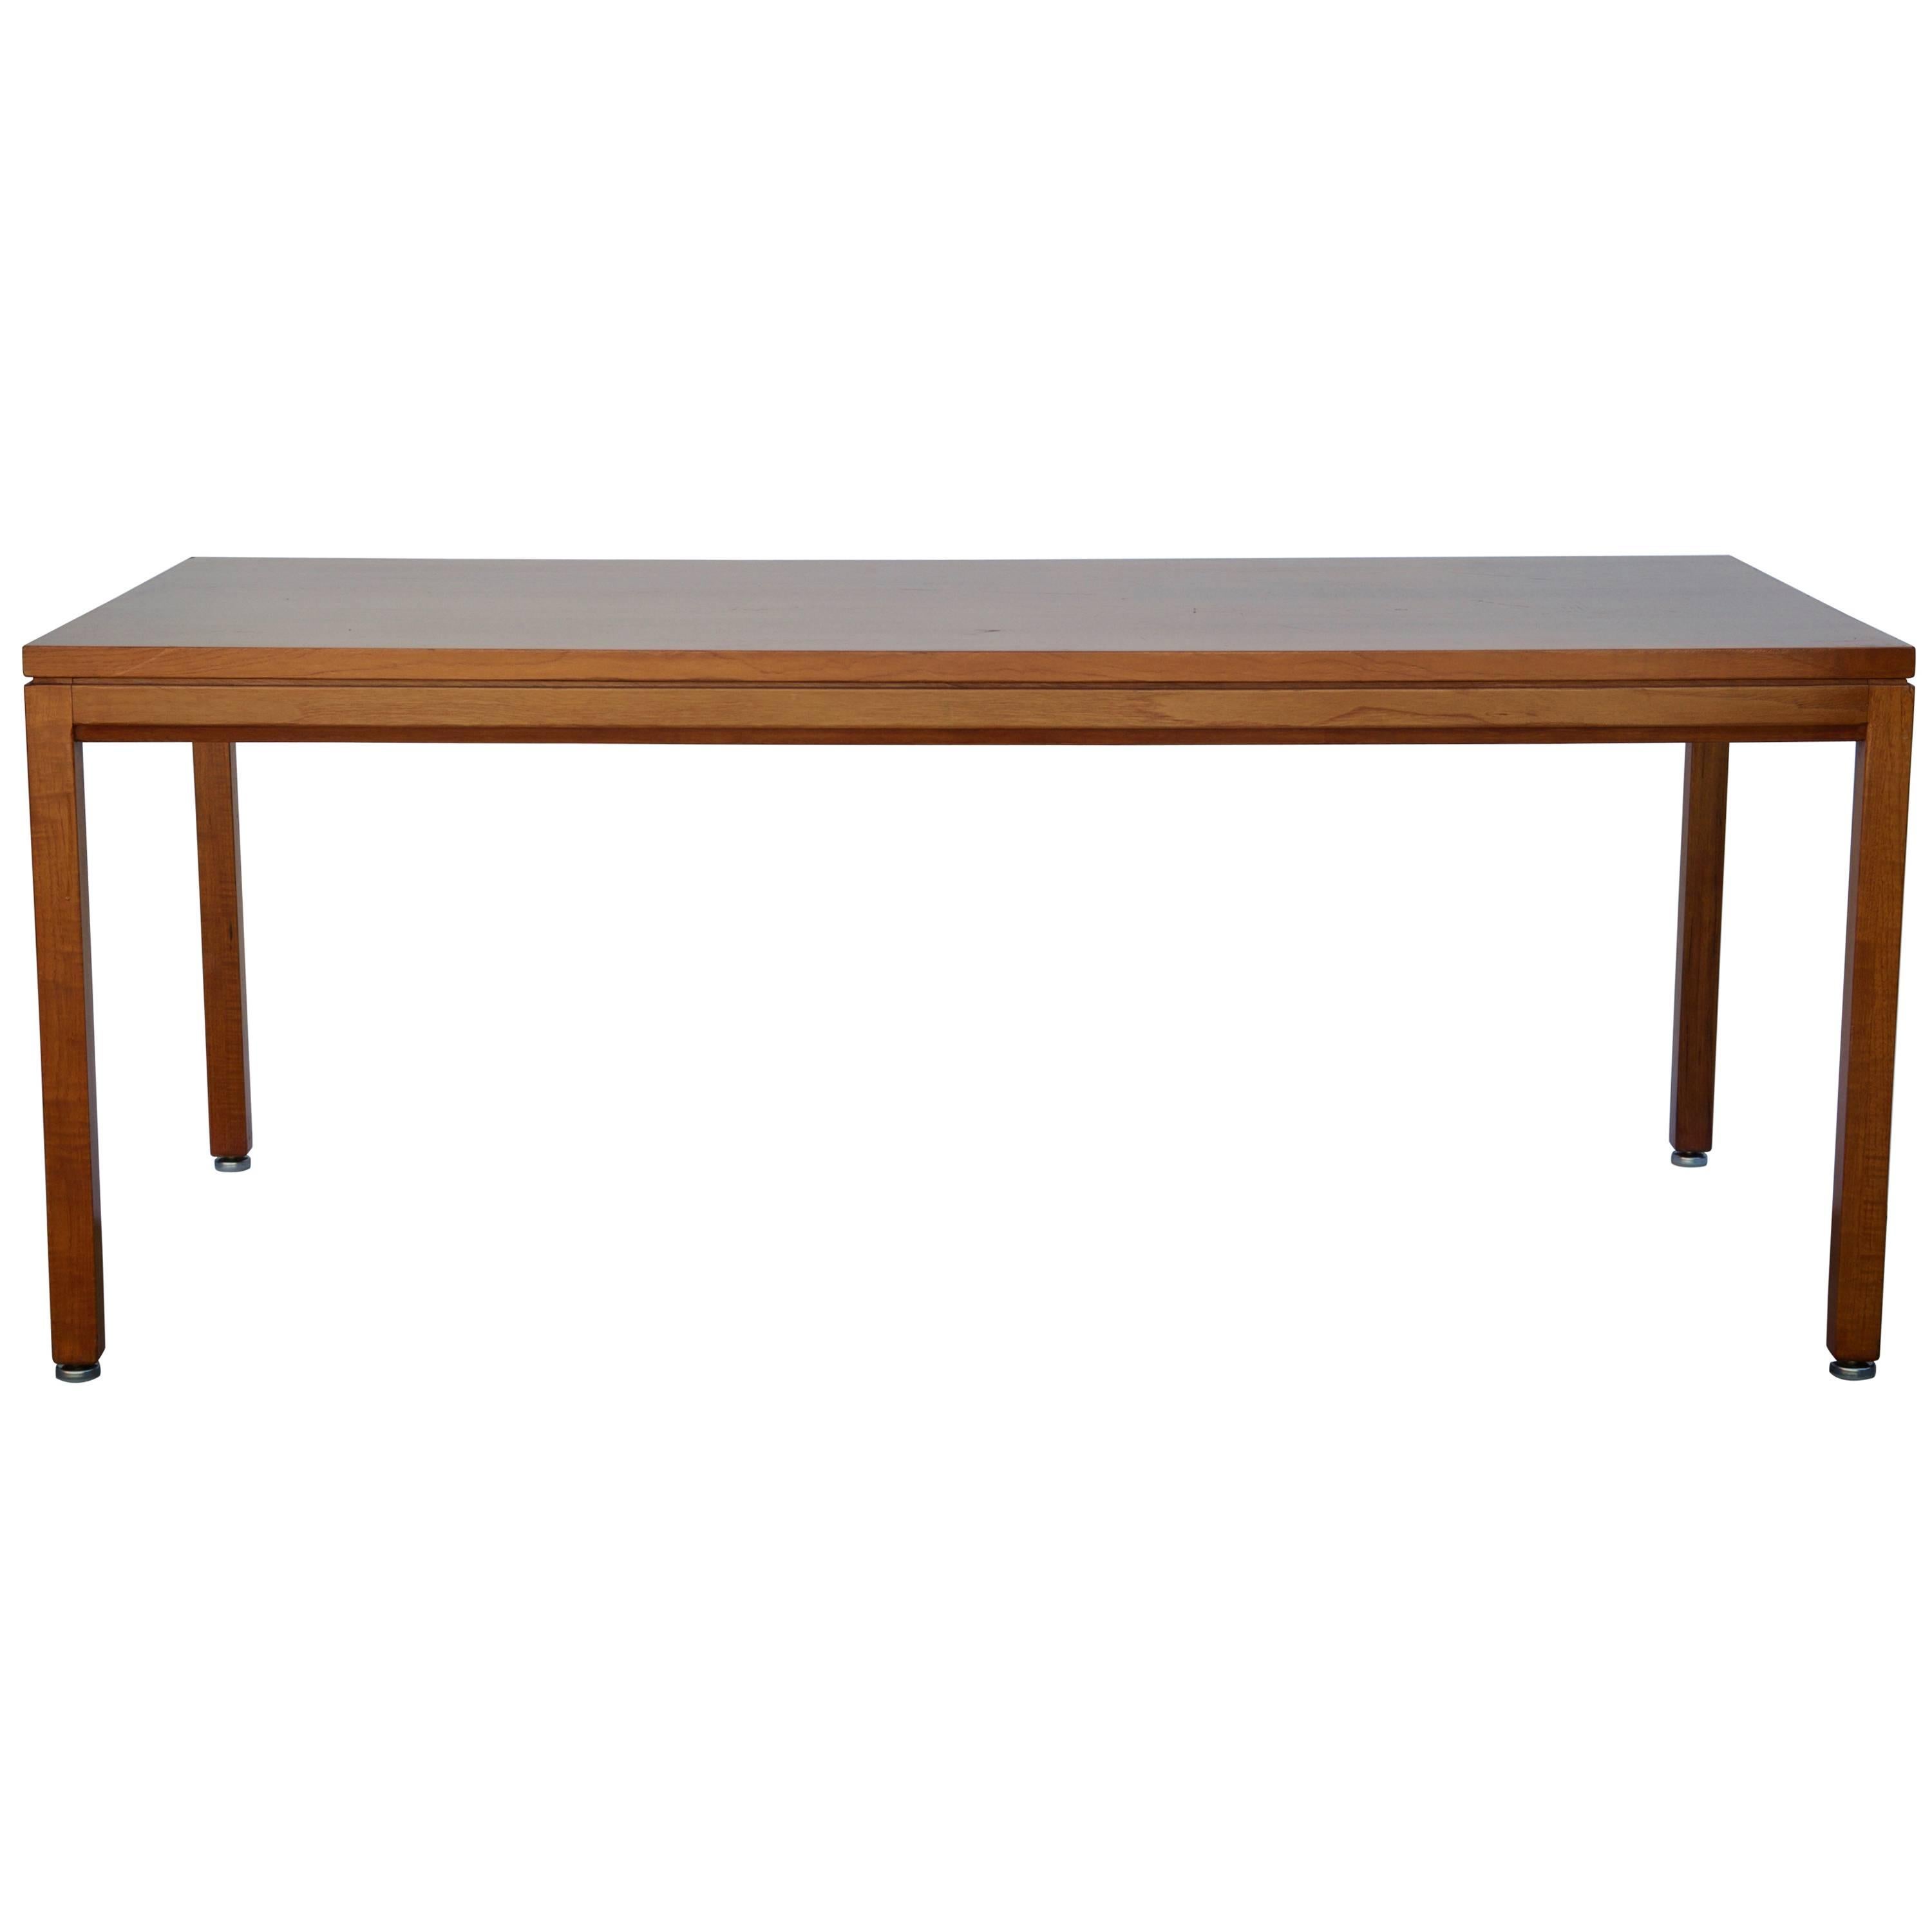 Impeccable Blond Walnut Desk or Library Table by Jens Risom